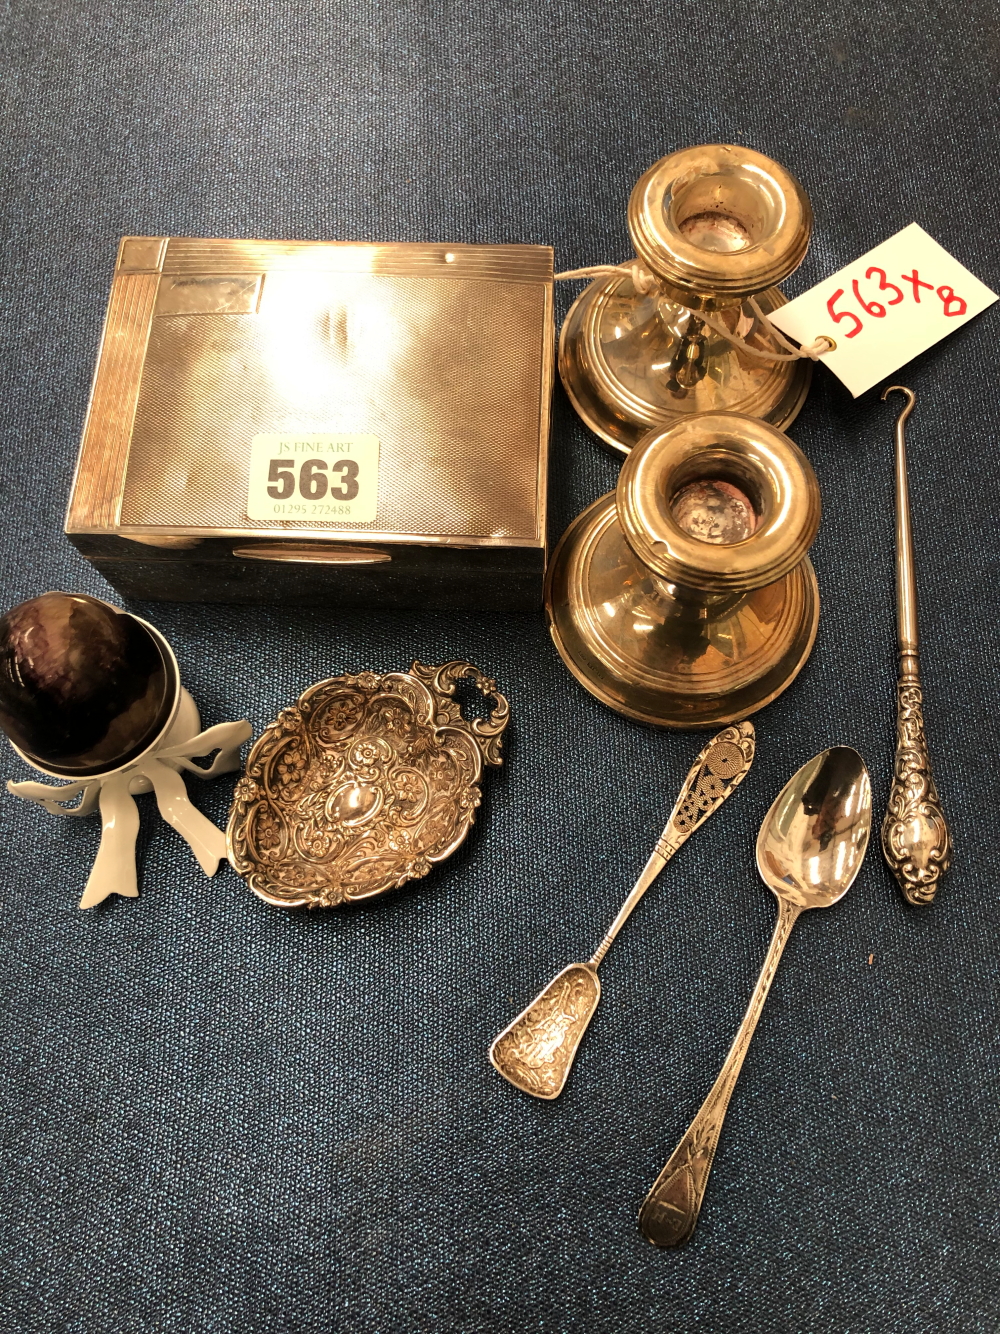 A PAIR OF SILVER DWARF CANDLESTICKS, A SILVER CIGARETTE BOX, A SWEETMEAT DISH, TWO TEA SPOONS, A